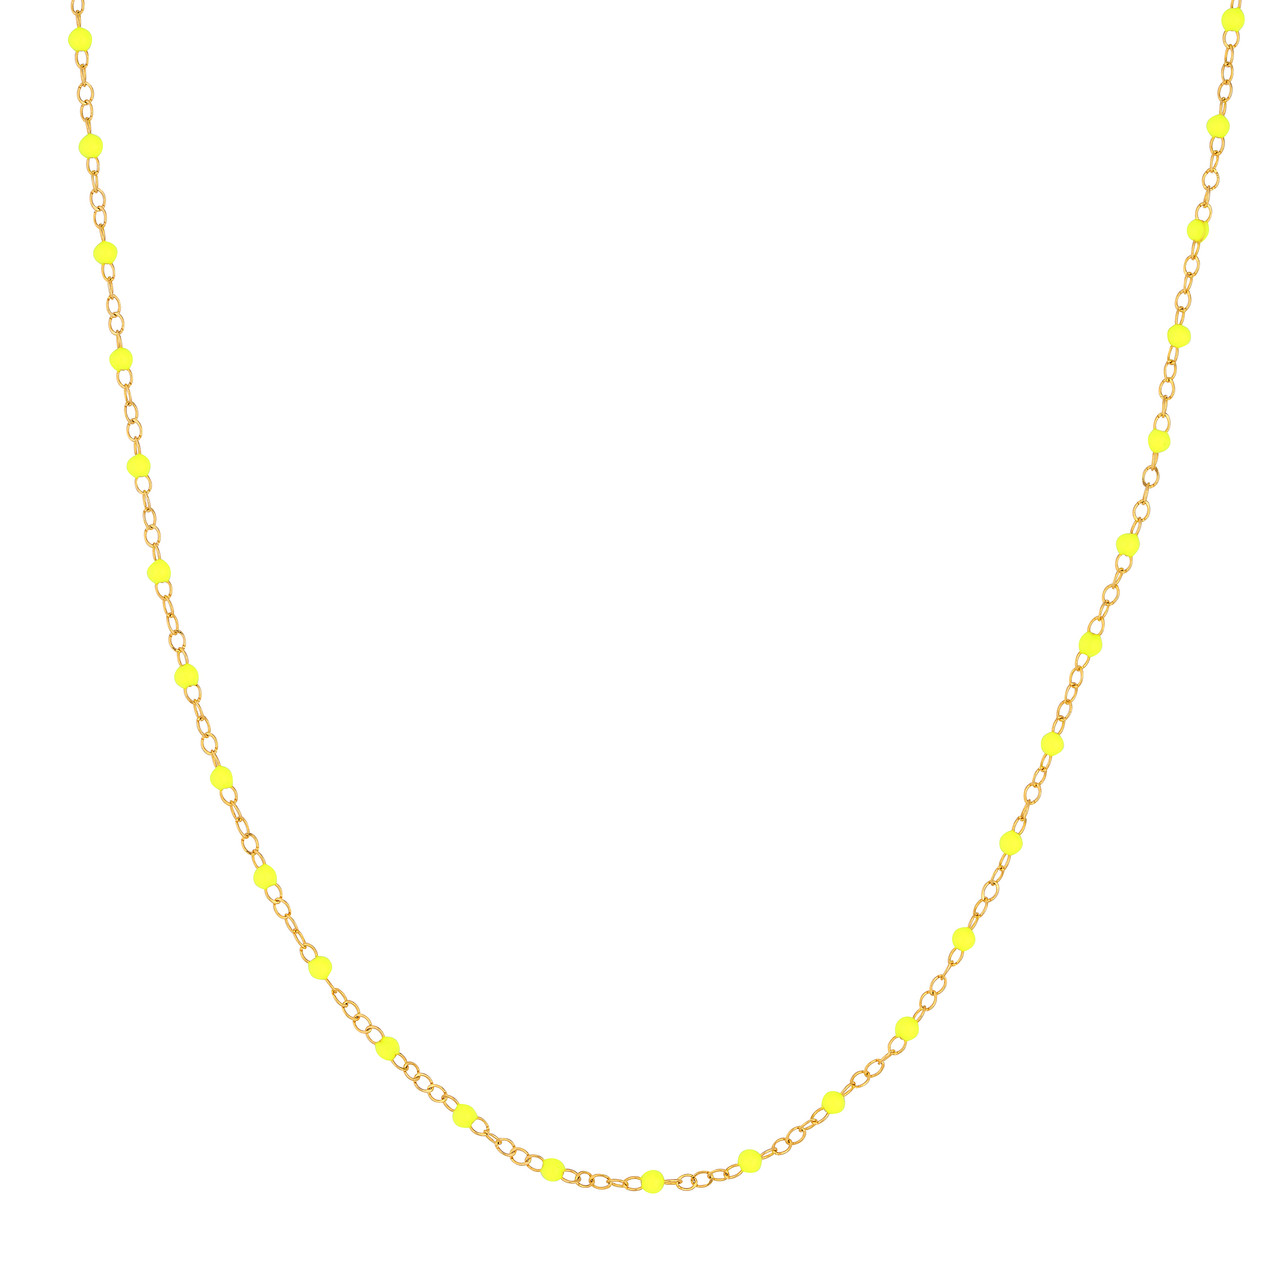 Yellow Gold Neon Yellow Enamel Bead Chain Necklace l 18 inches